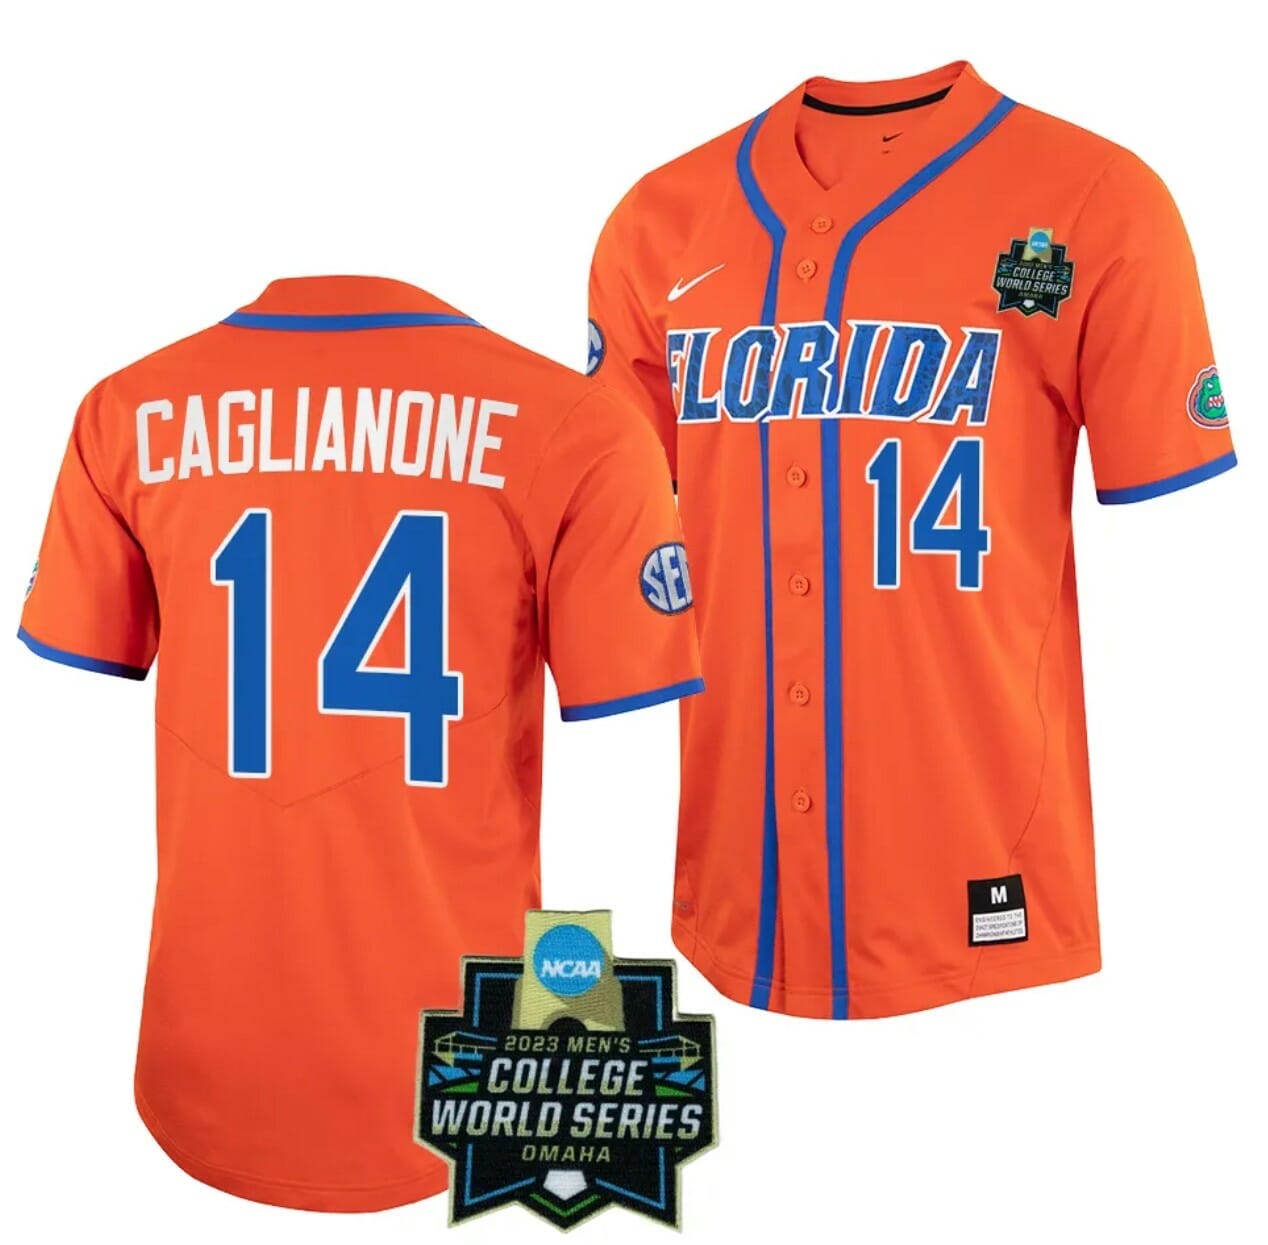 Available] Buy New Jac Caglianone Jersey Orange #14 WS 2023